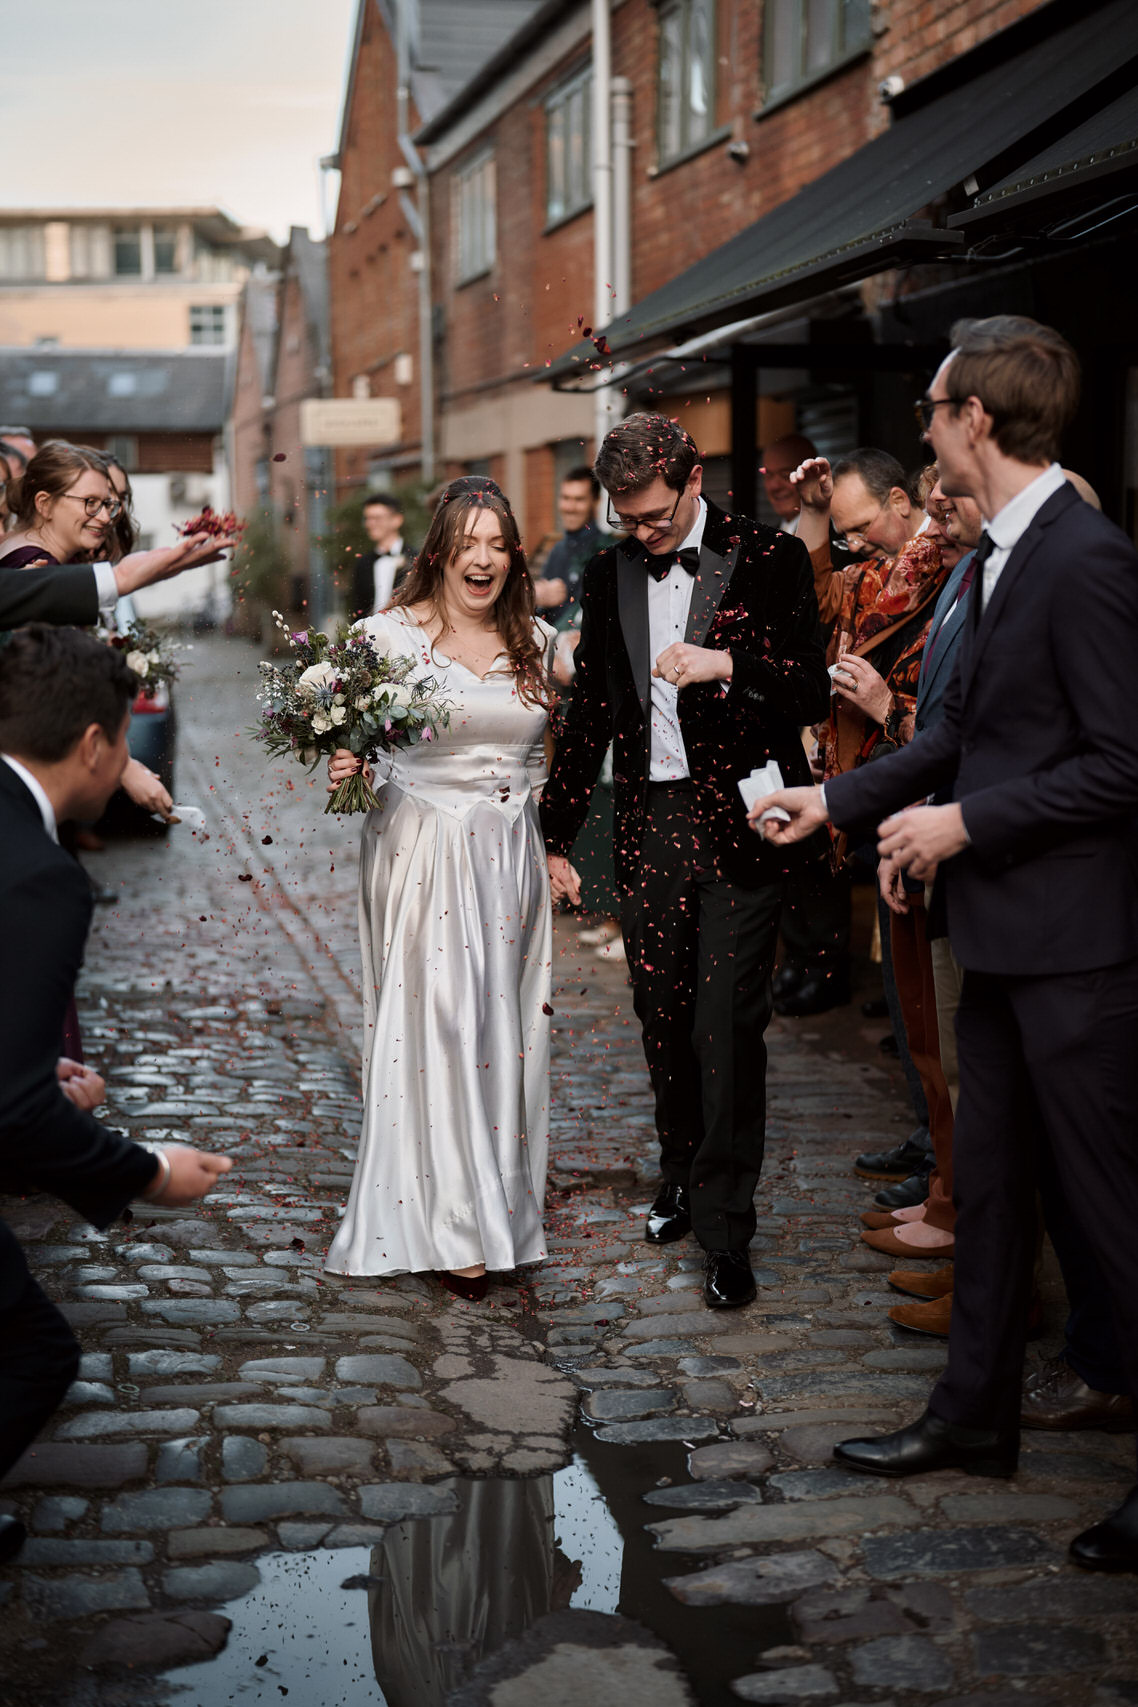 A couple just married is strolling down a street with stone pavement.